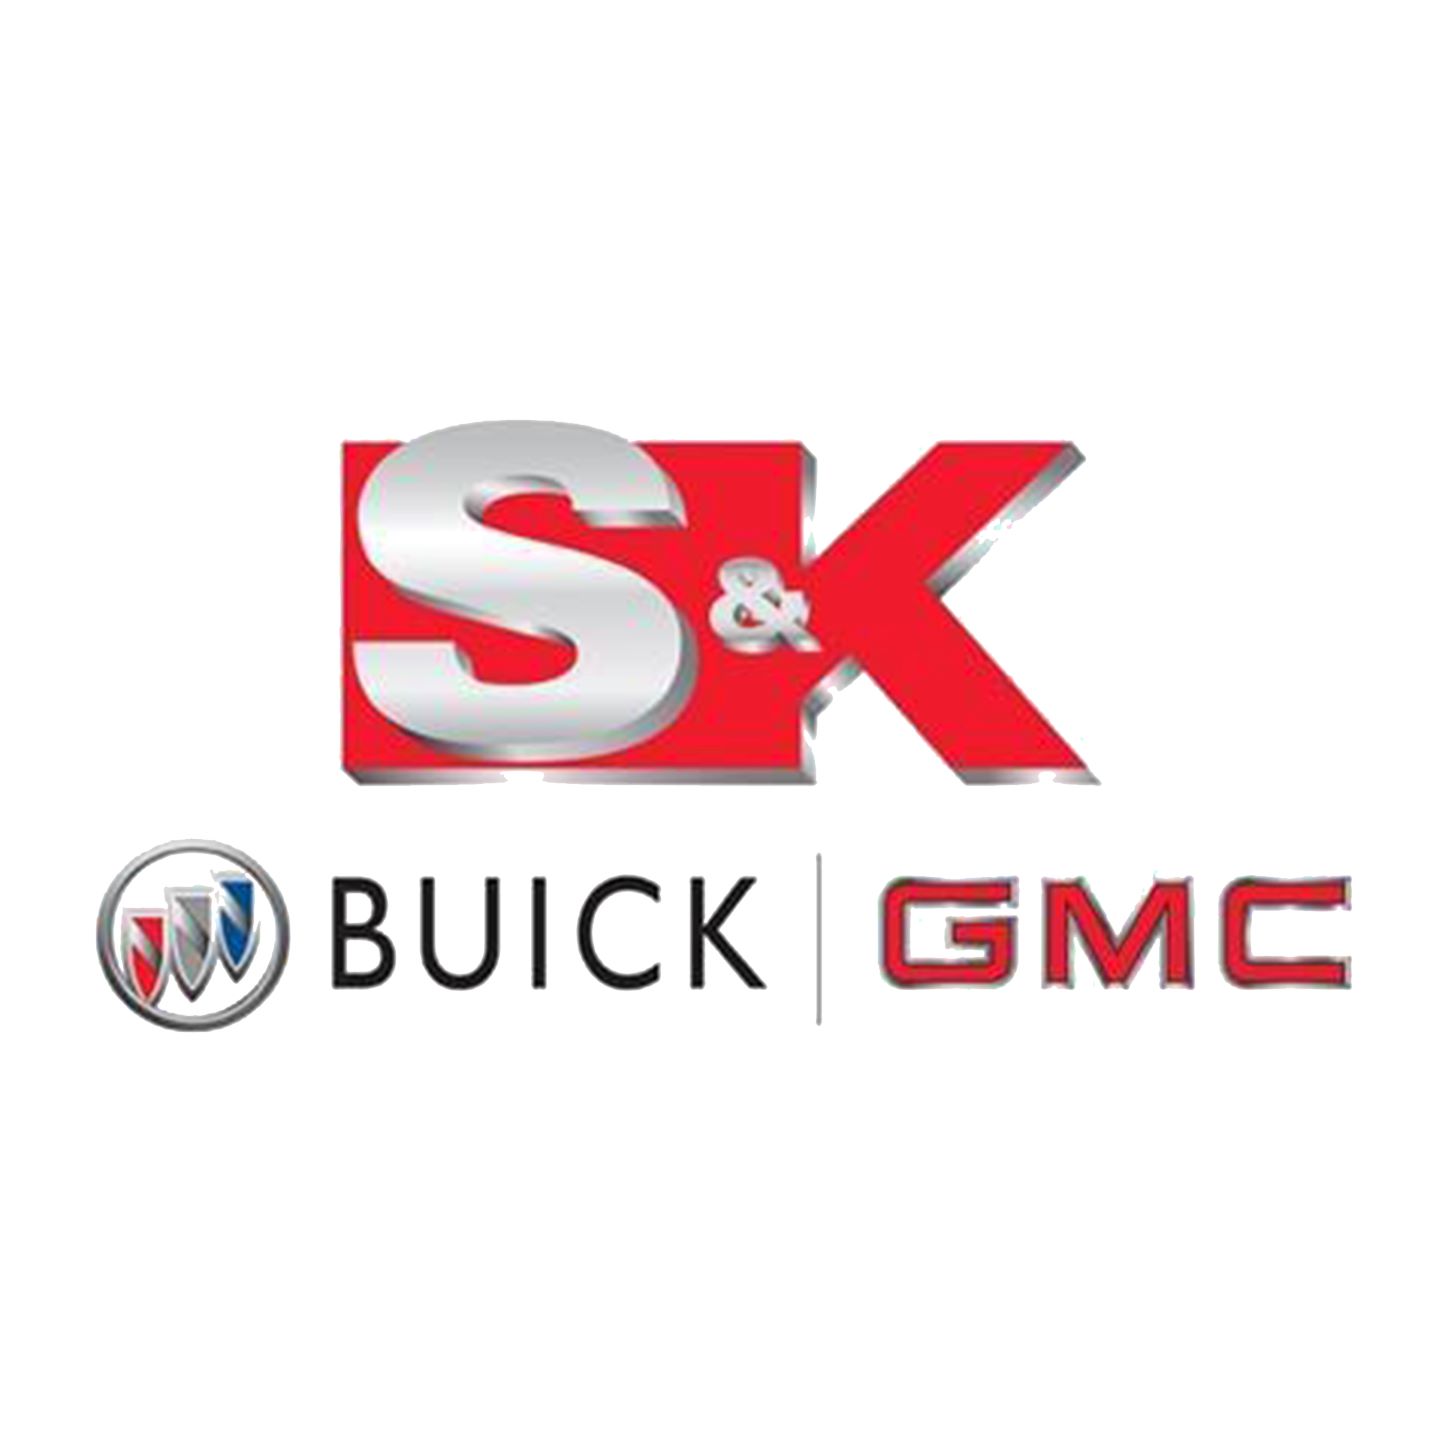 A. S&K Buick (Silver)